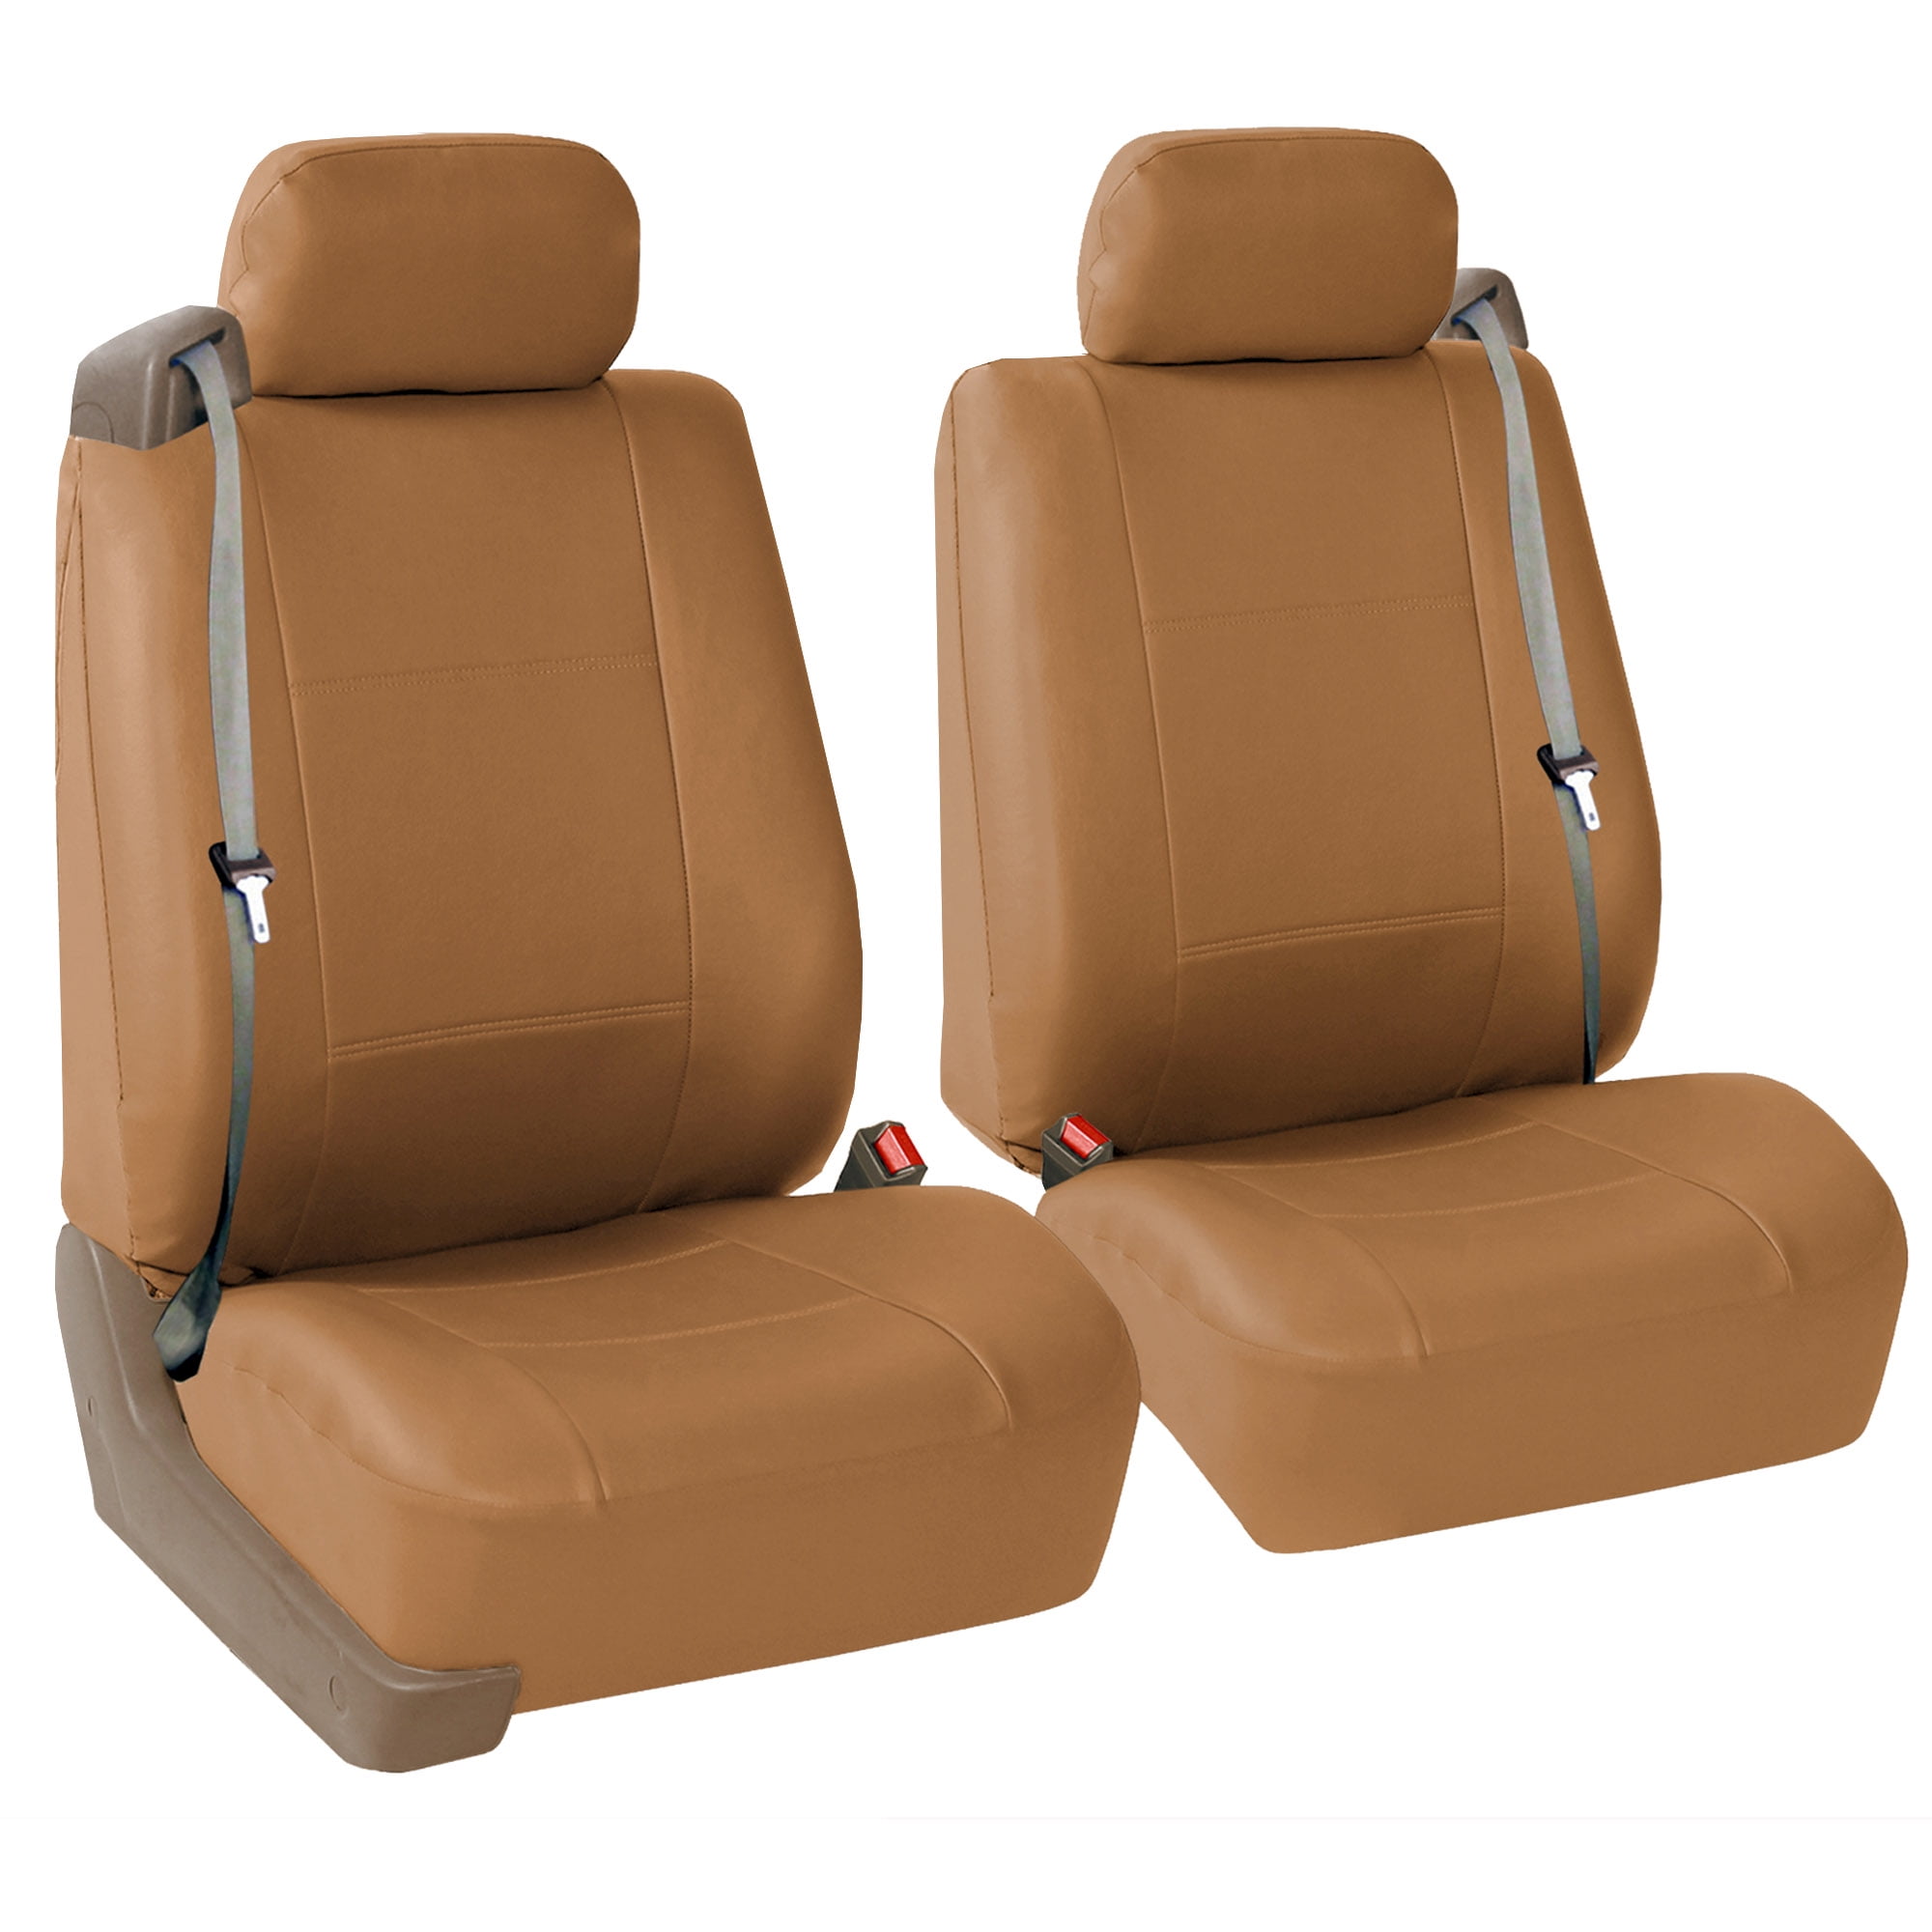 FH Group Universal Fit PU Leather Car Seat Covers for Sedan SUV Van Truck  with Integrated Seatbelt and Airbag Compatible, Waterproof, UV-Resistant,  Durable, Easy to Install Front Set